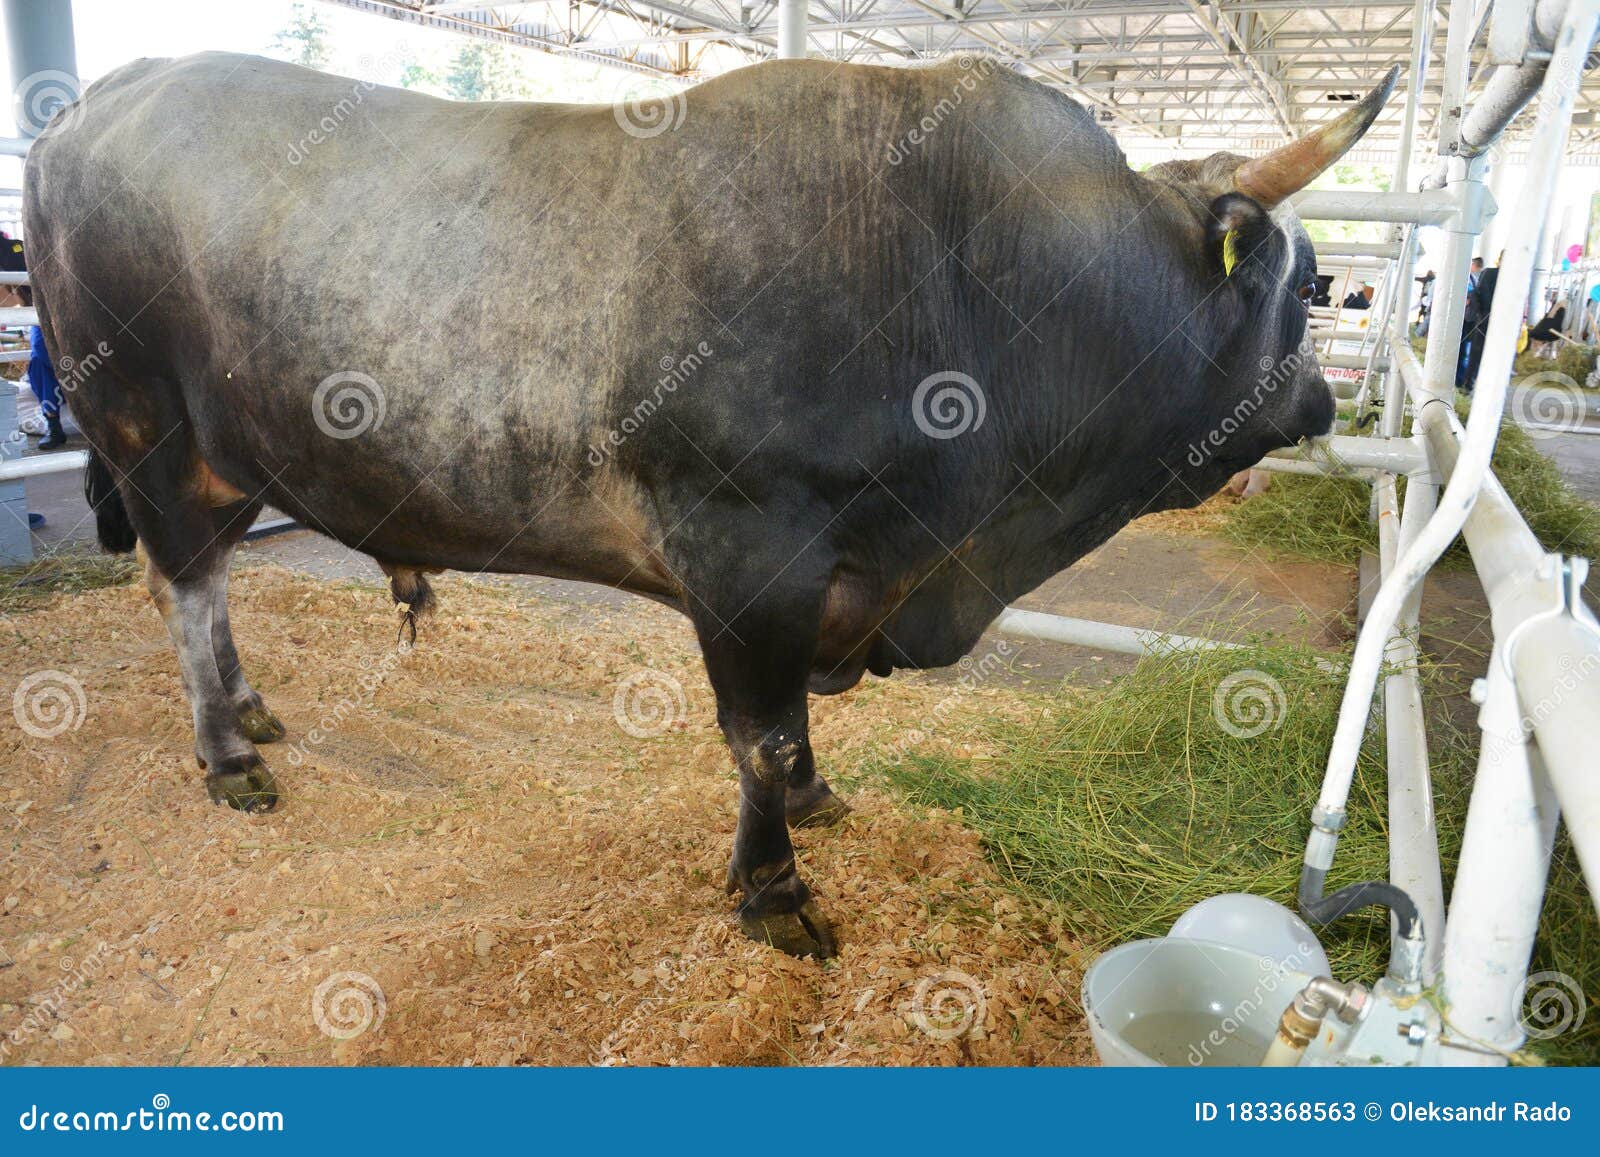 corriente cattle breed bull, also known as  criollo or chinampo cattle with long upcurving horns raised for rodeo events and meat